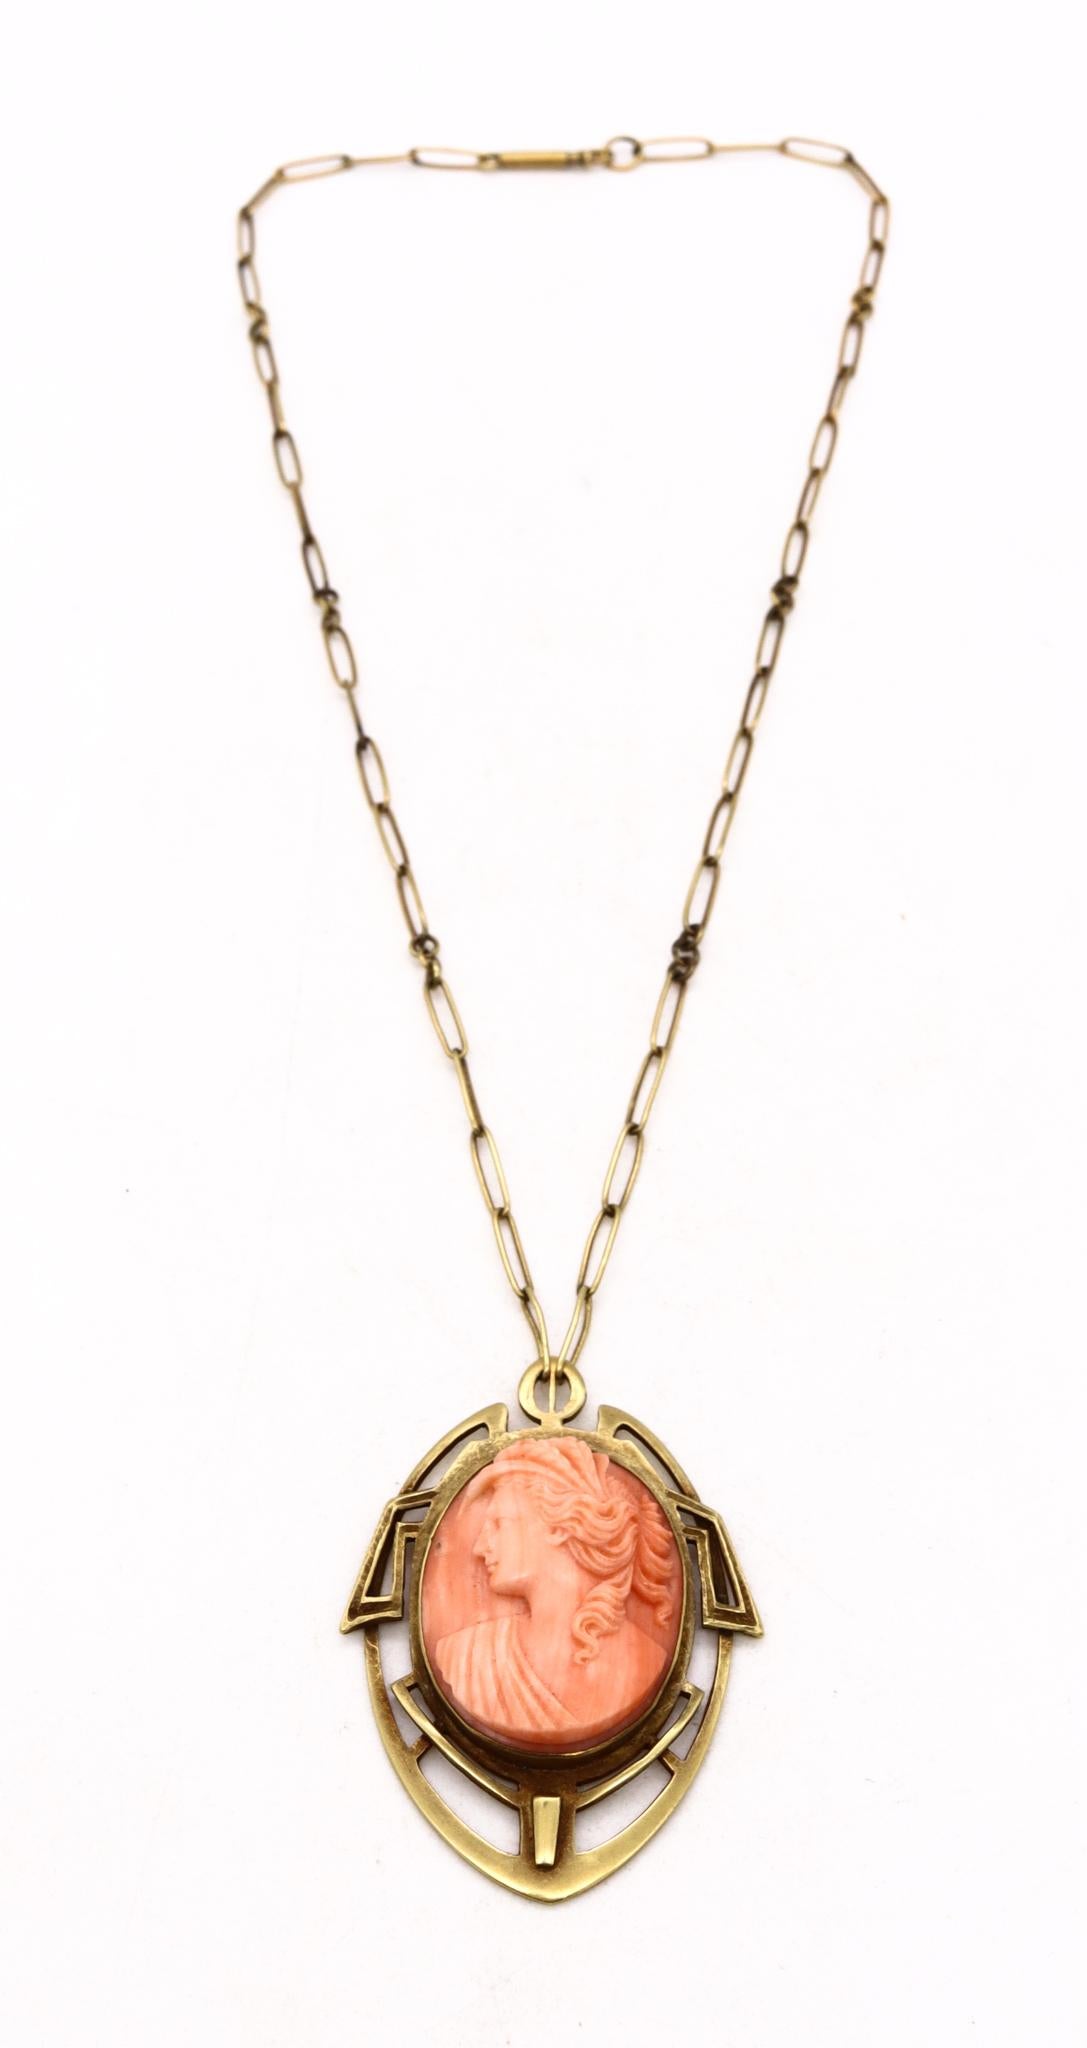 British 1890 Rare Liberty Art and Craft Geometric Necklace 18kt Gold Coral Cameo For Sale 4